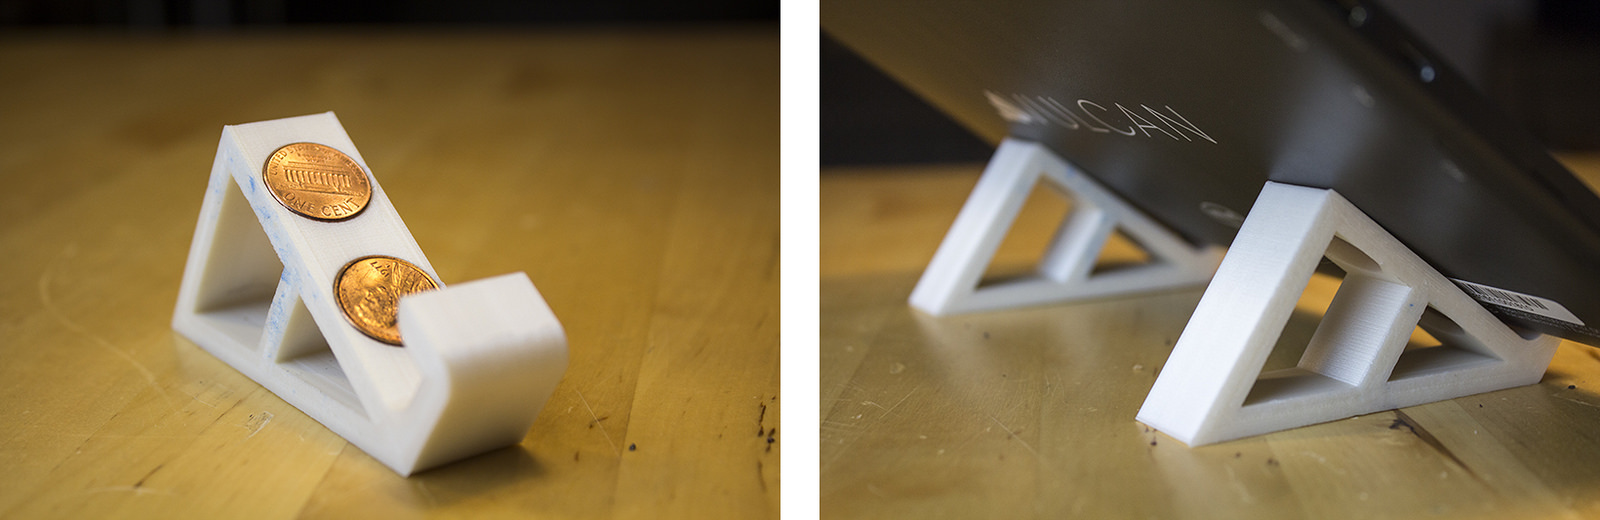 Image: Medley: Enhancing 3D Printed Objects with Embedded Materials